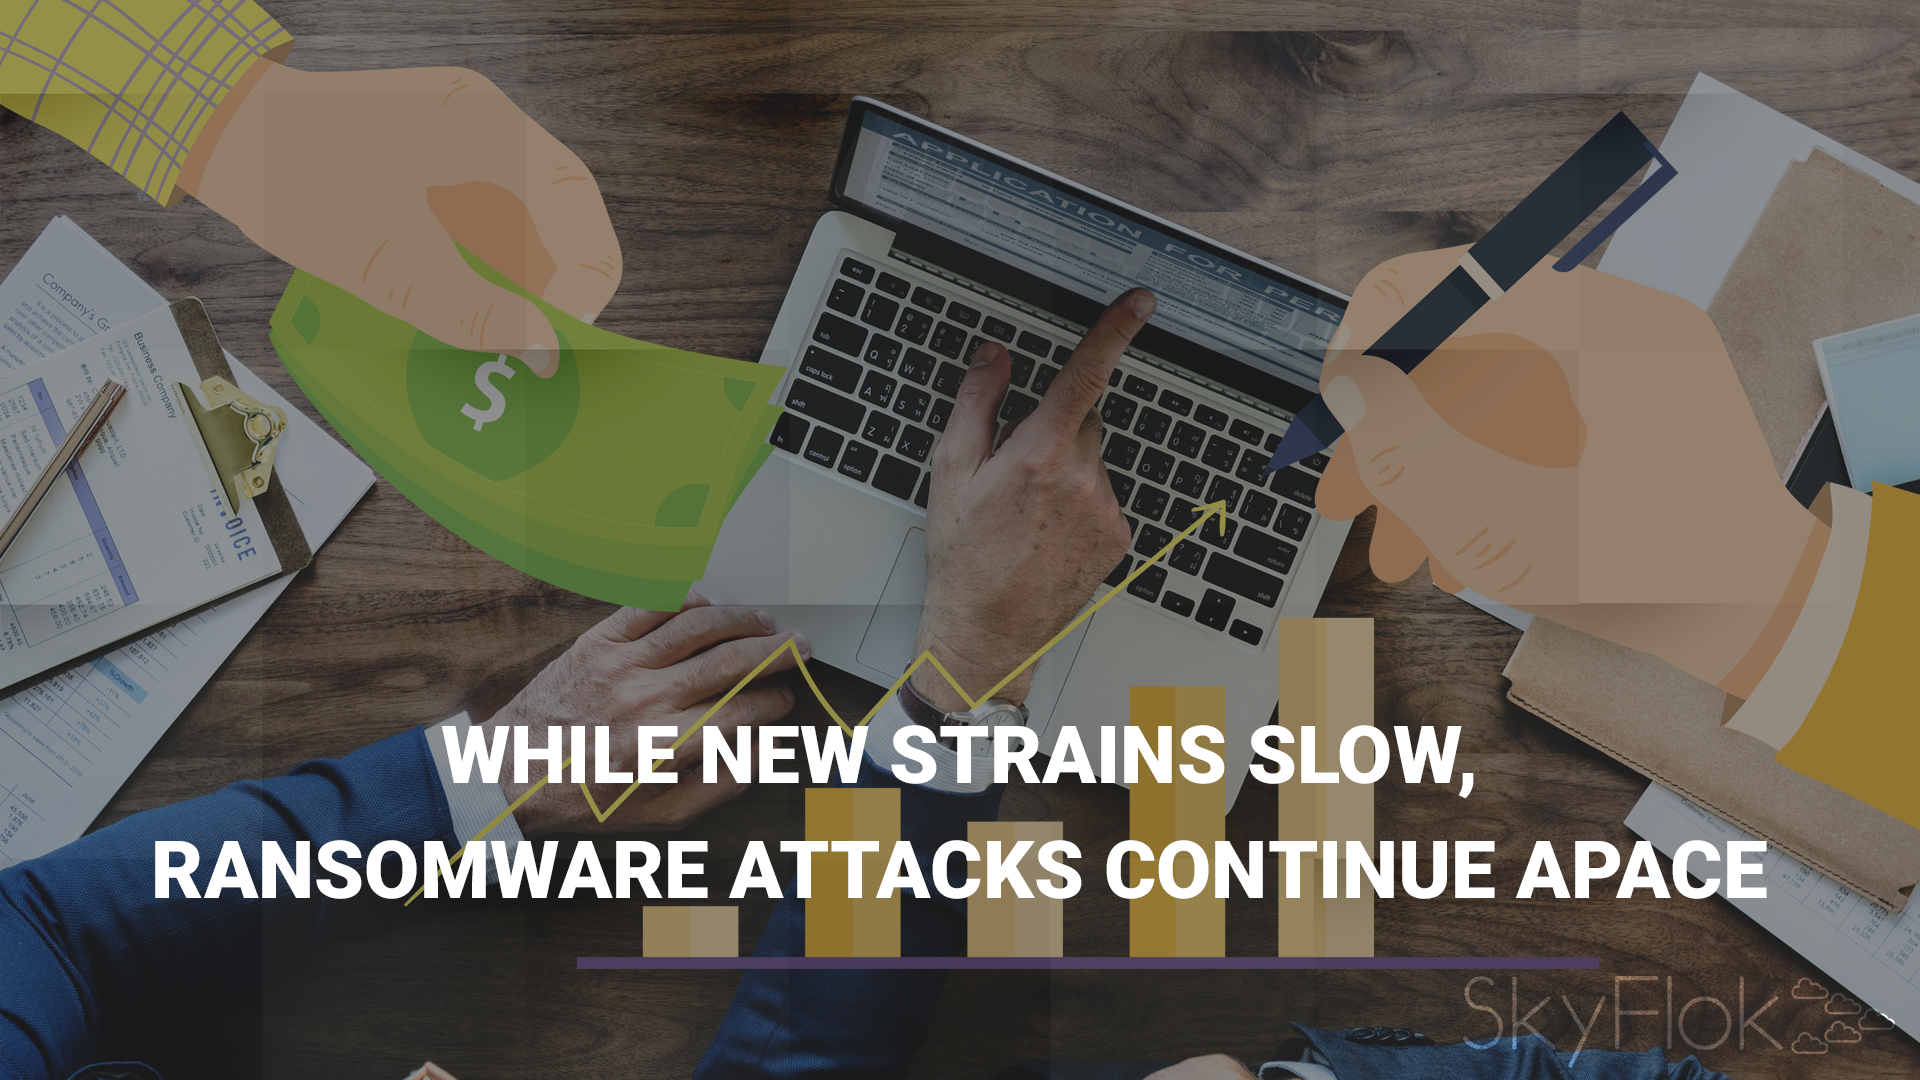 While New Strains Slow, Ransomware Attacks Continue Apace